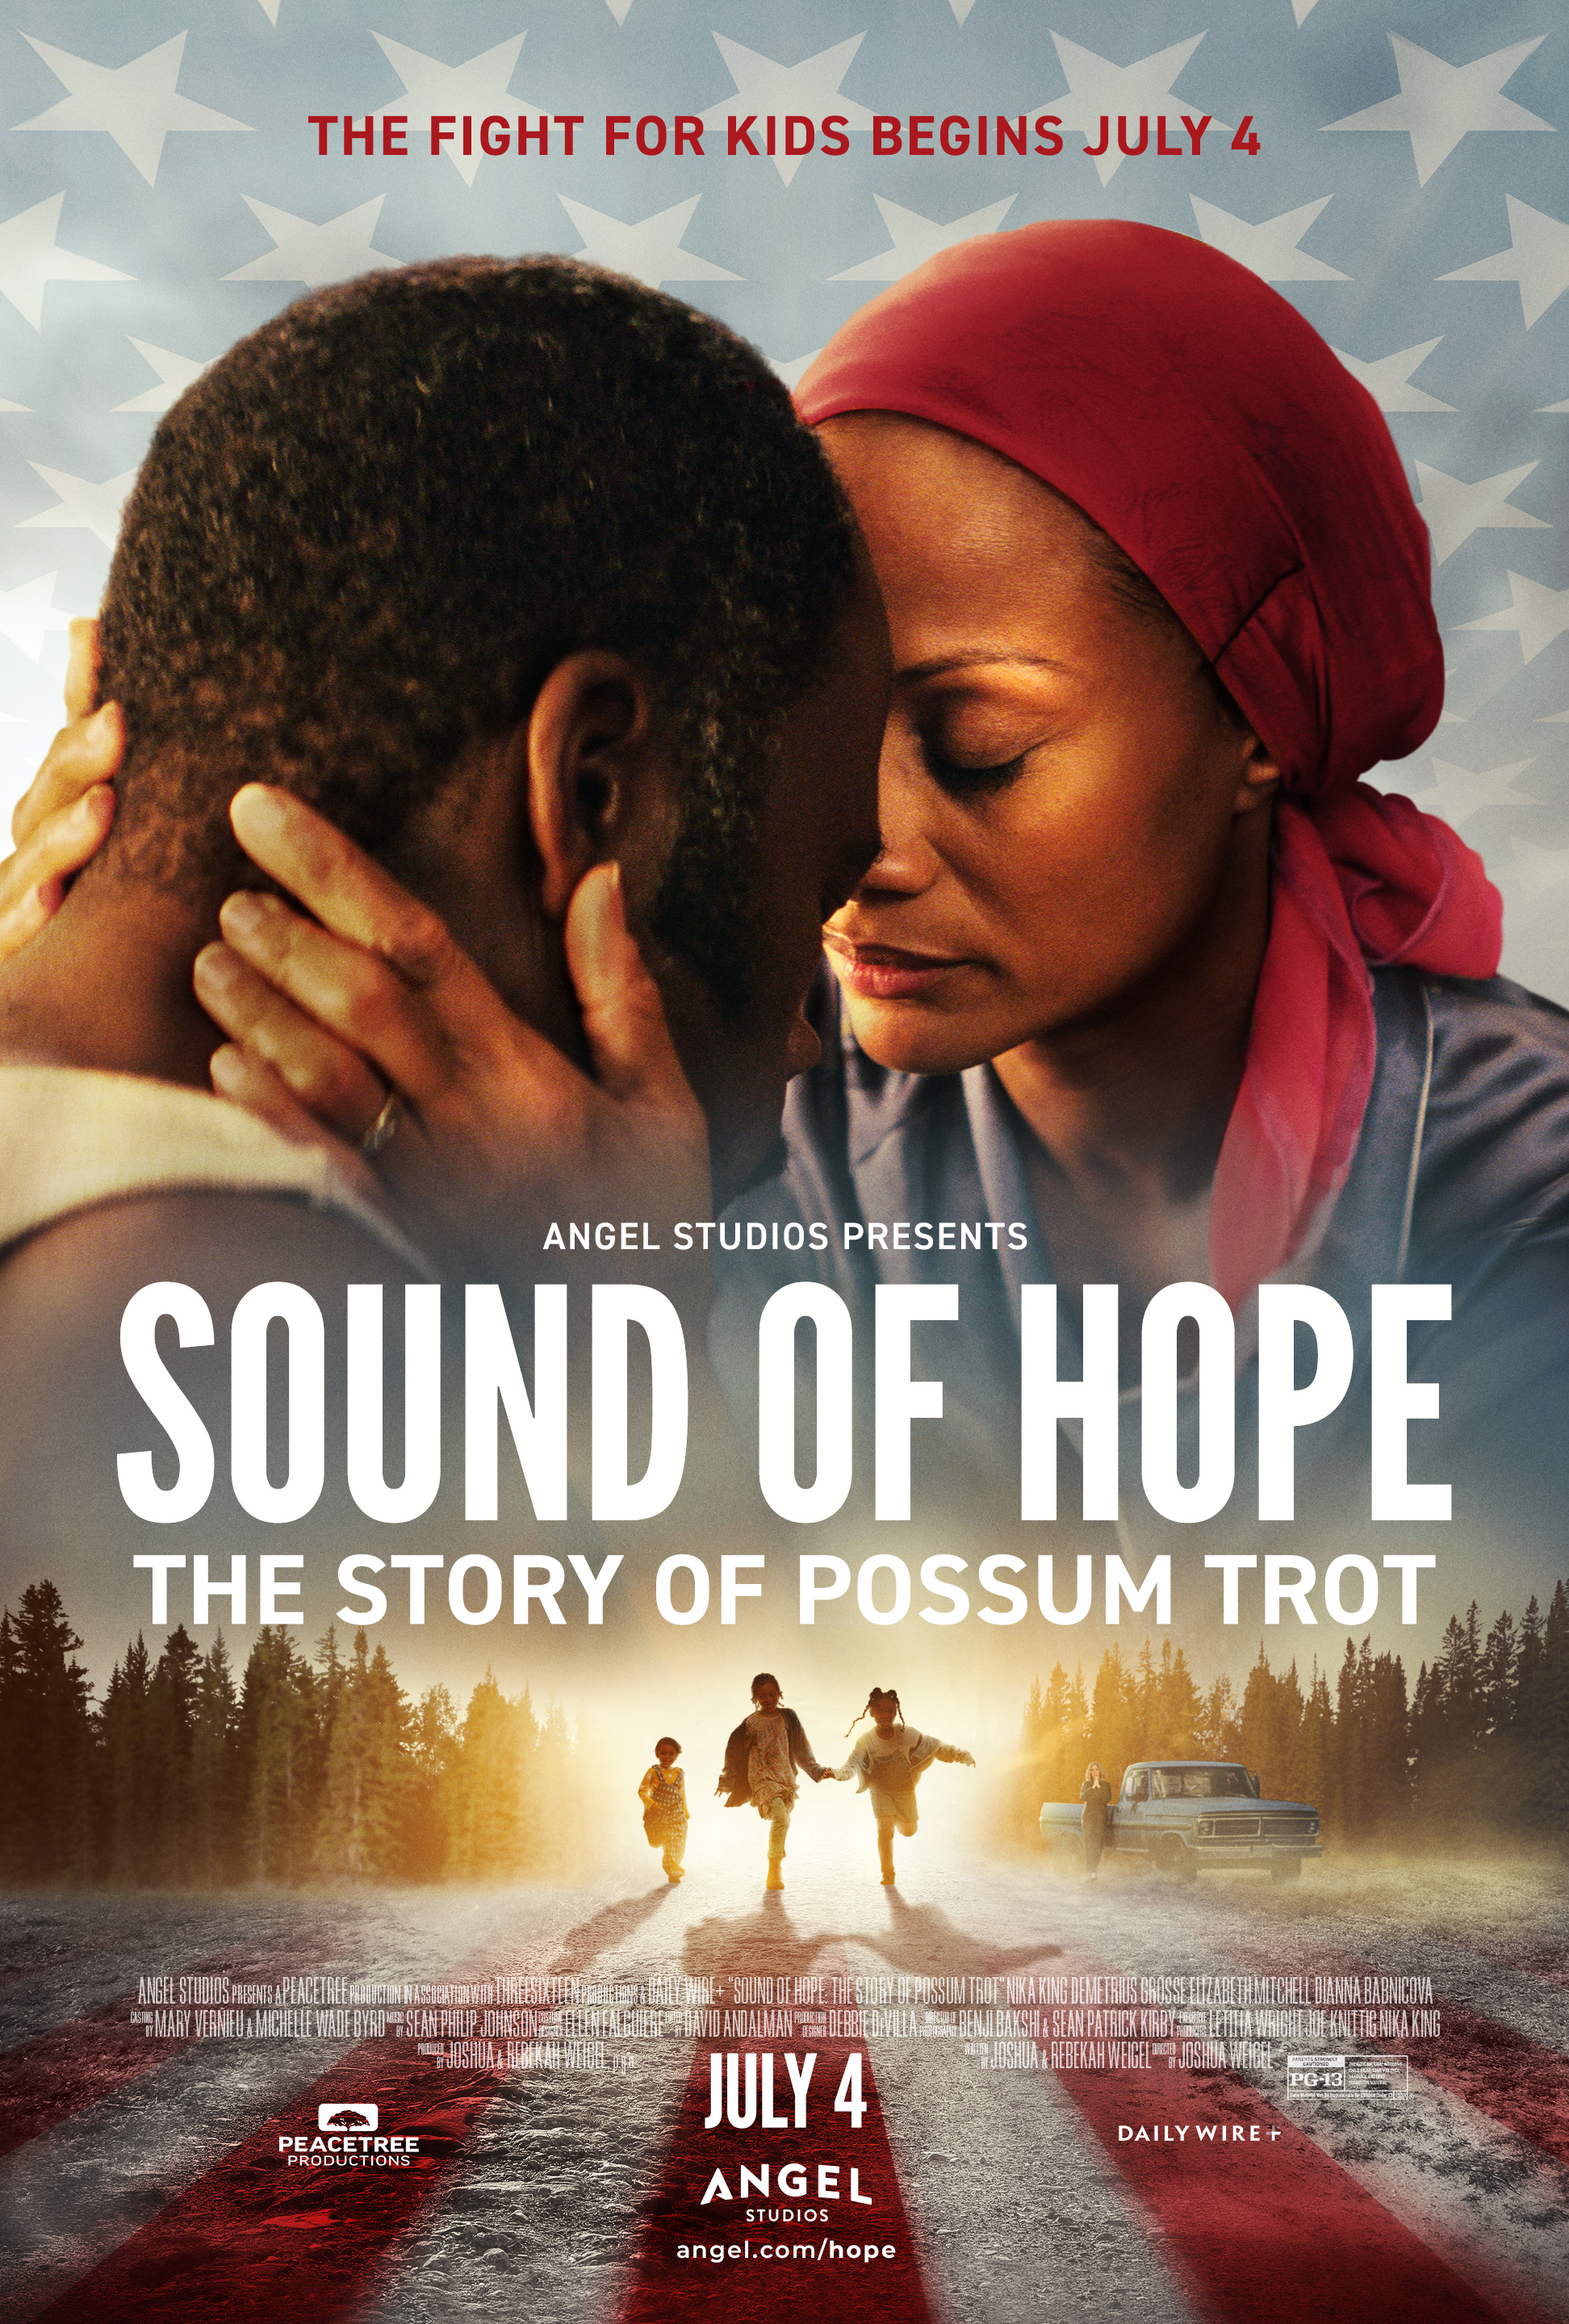 Sound of Hope: The Story of Possum Trot Image